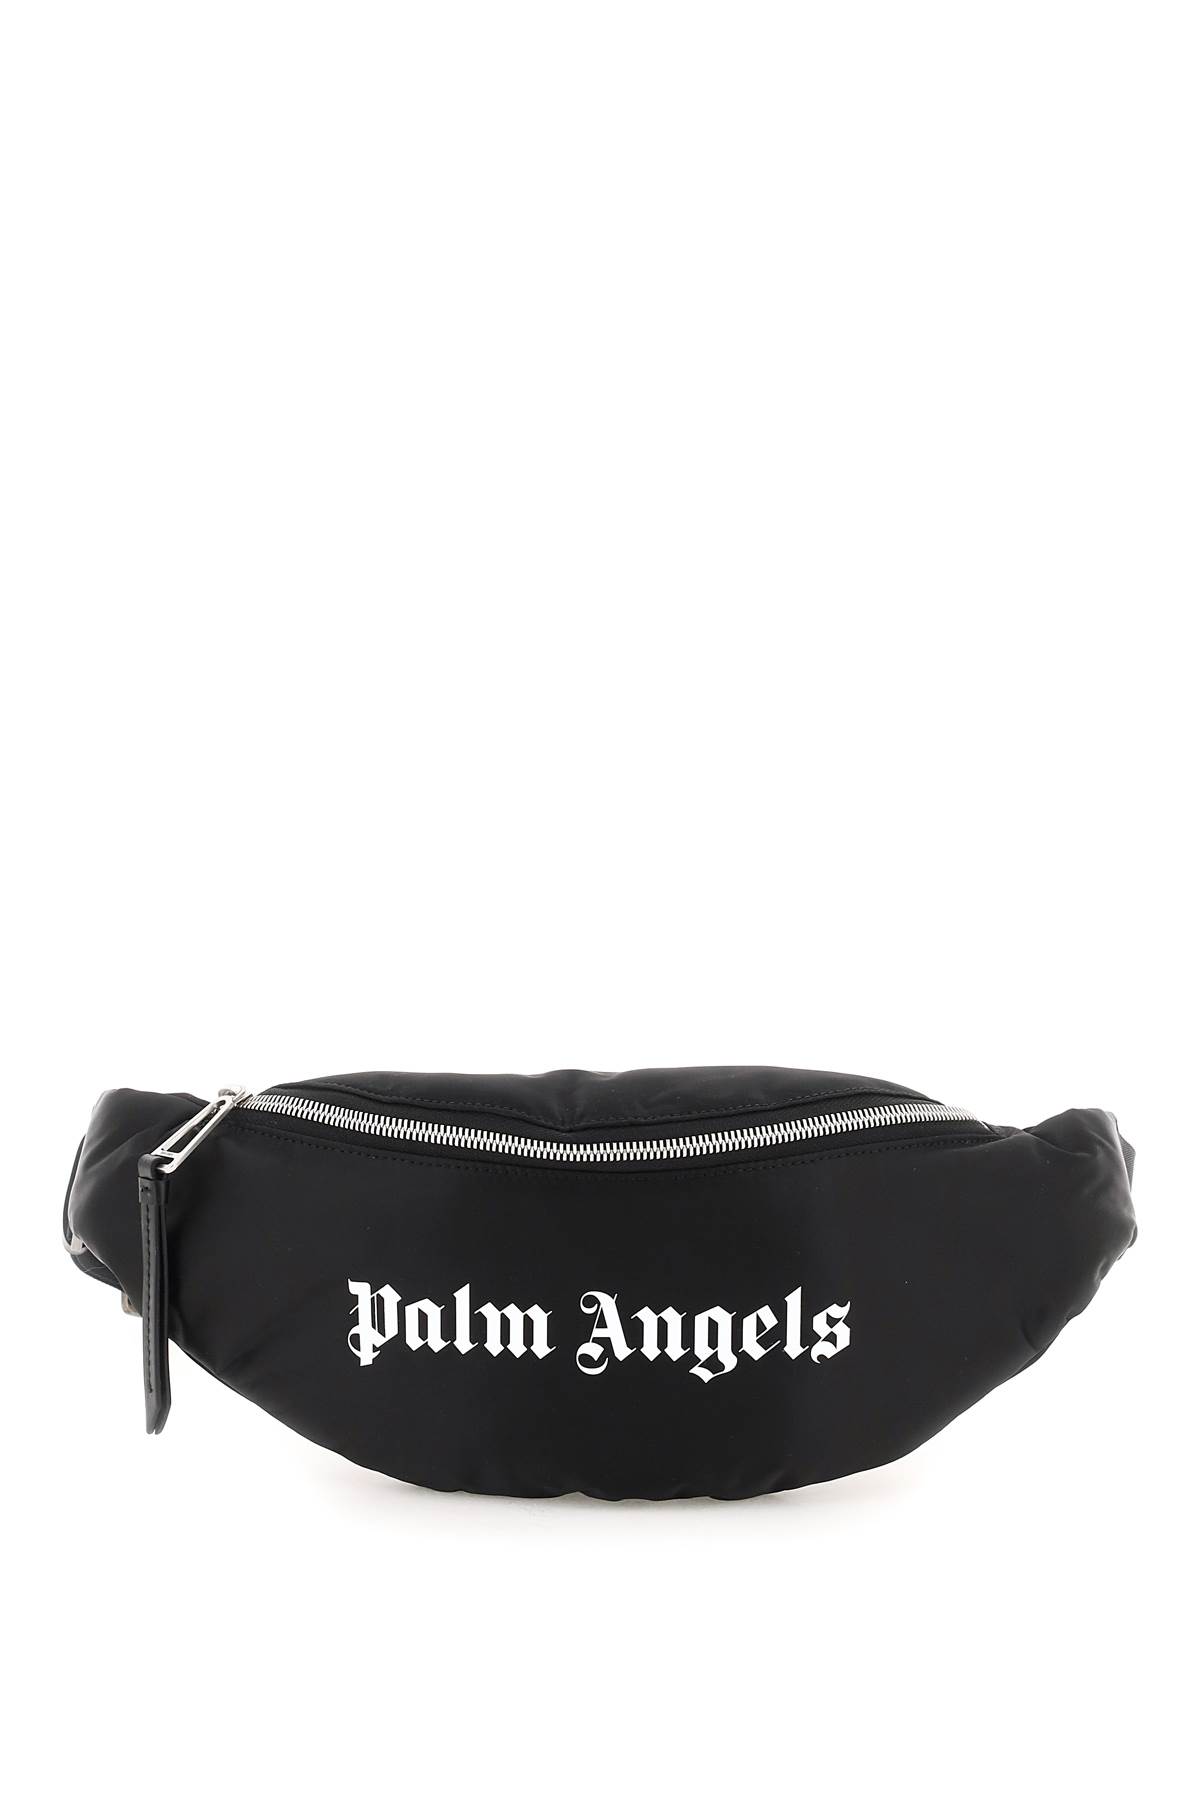 Palm Angels Nylon Beltpack With Logo